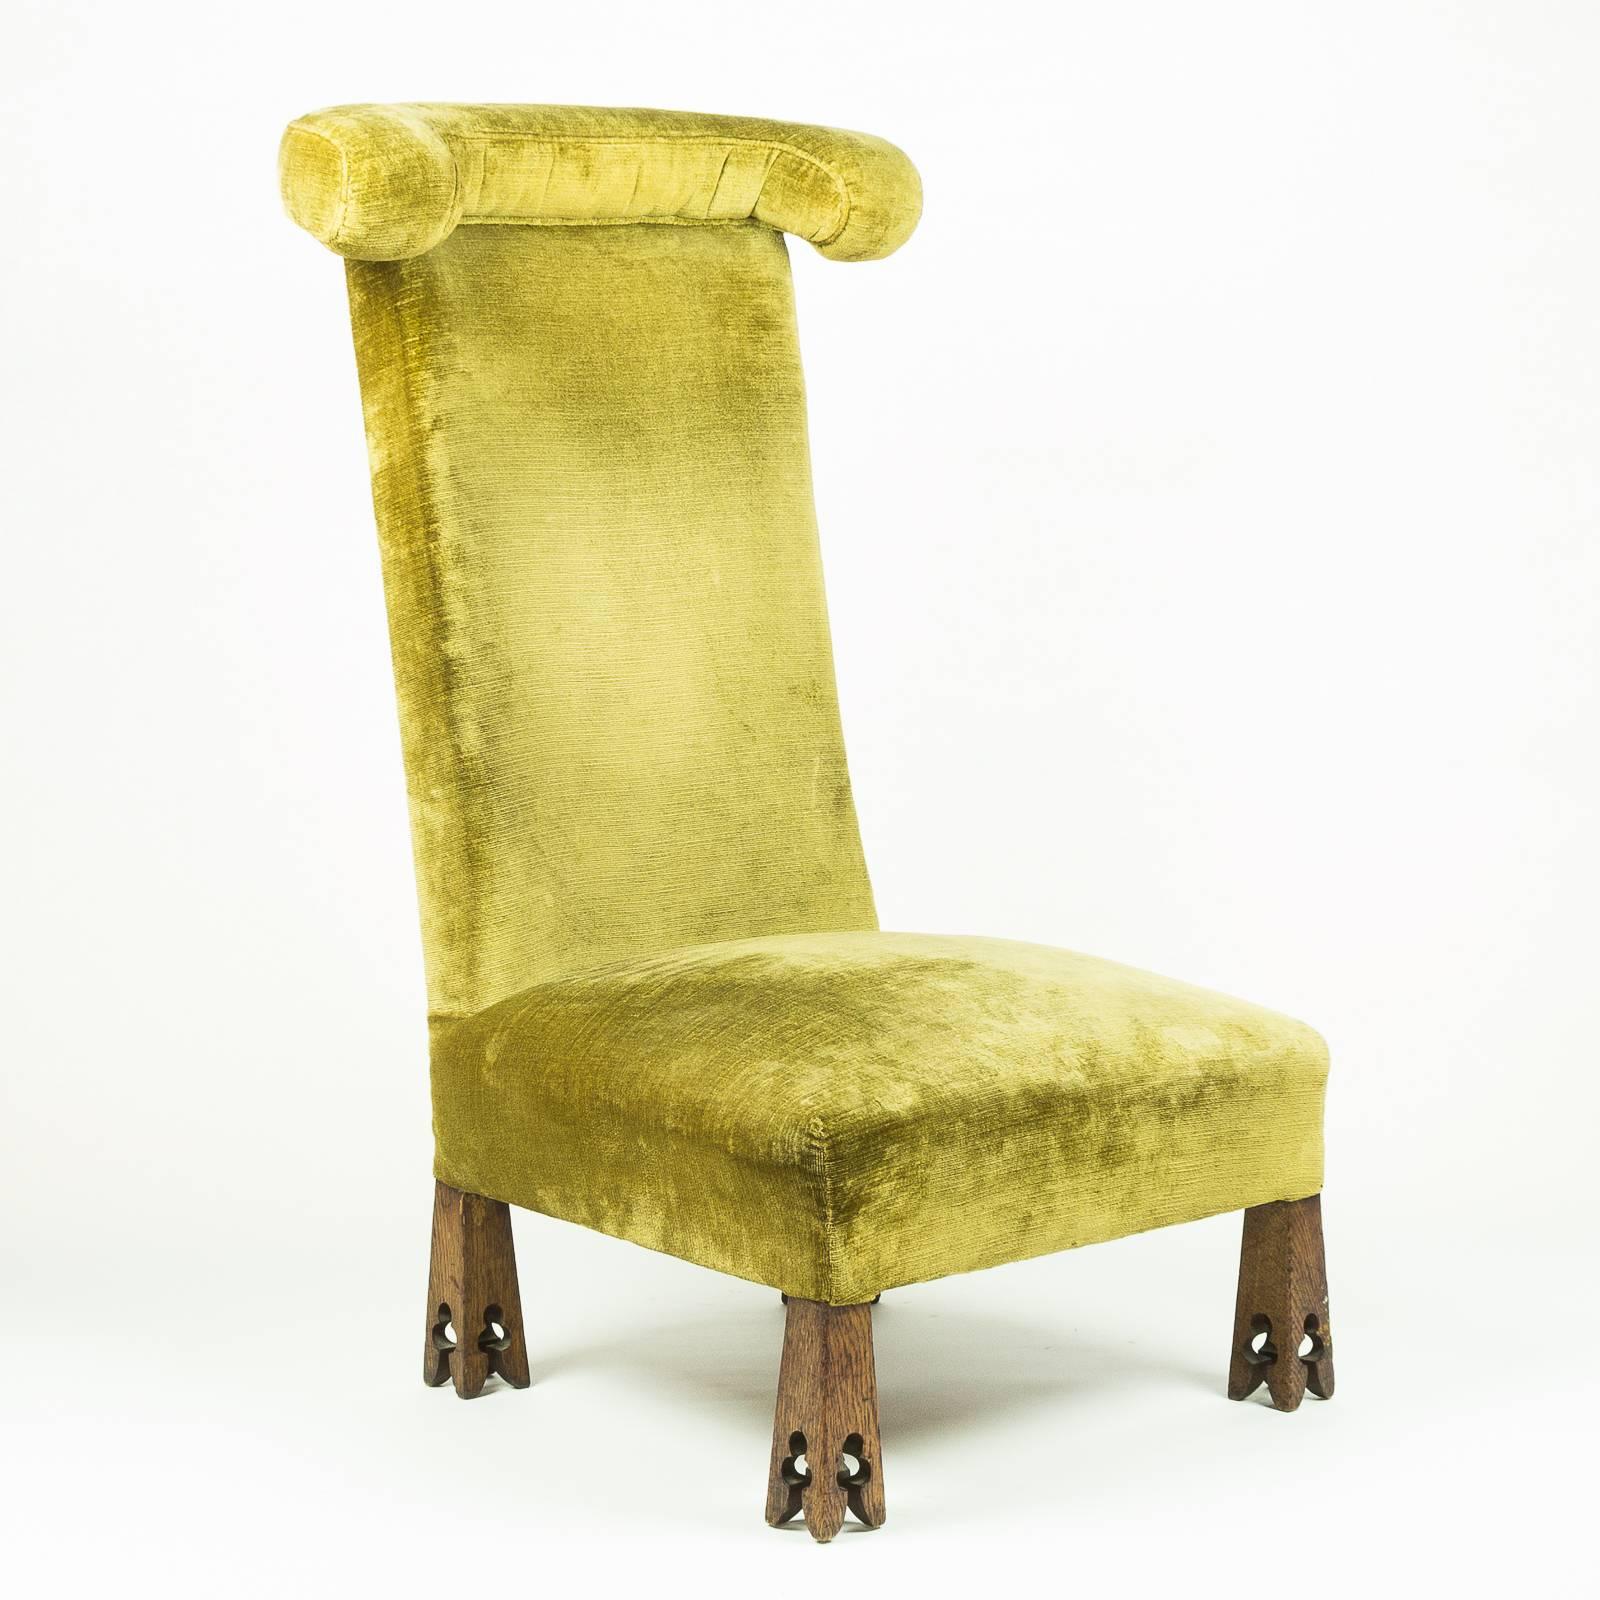 An Arts and Crafts 'Prie Dieu' chair with velvet upholstery and carved oak feet, Probably retailed through Morris & Co. 